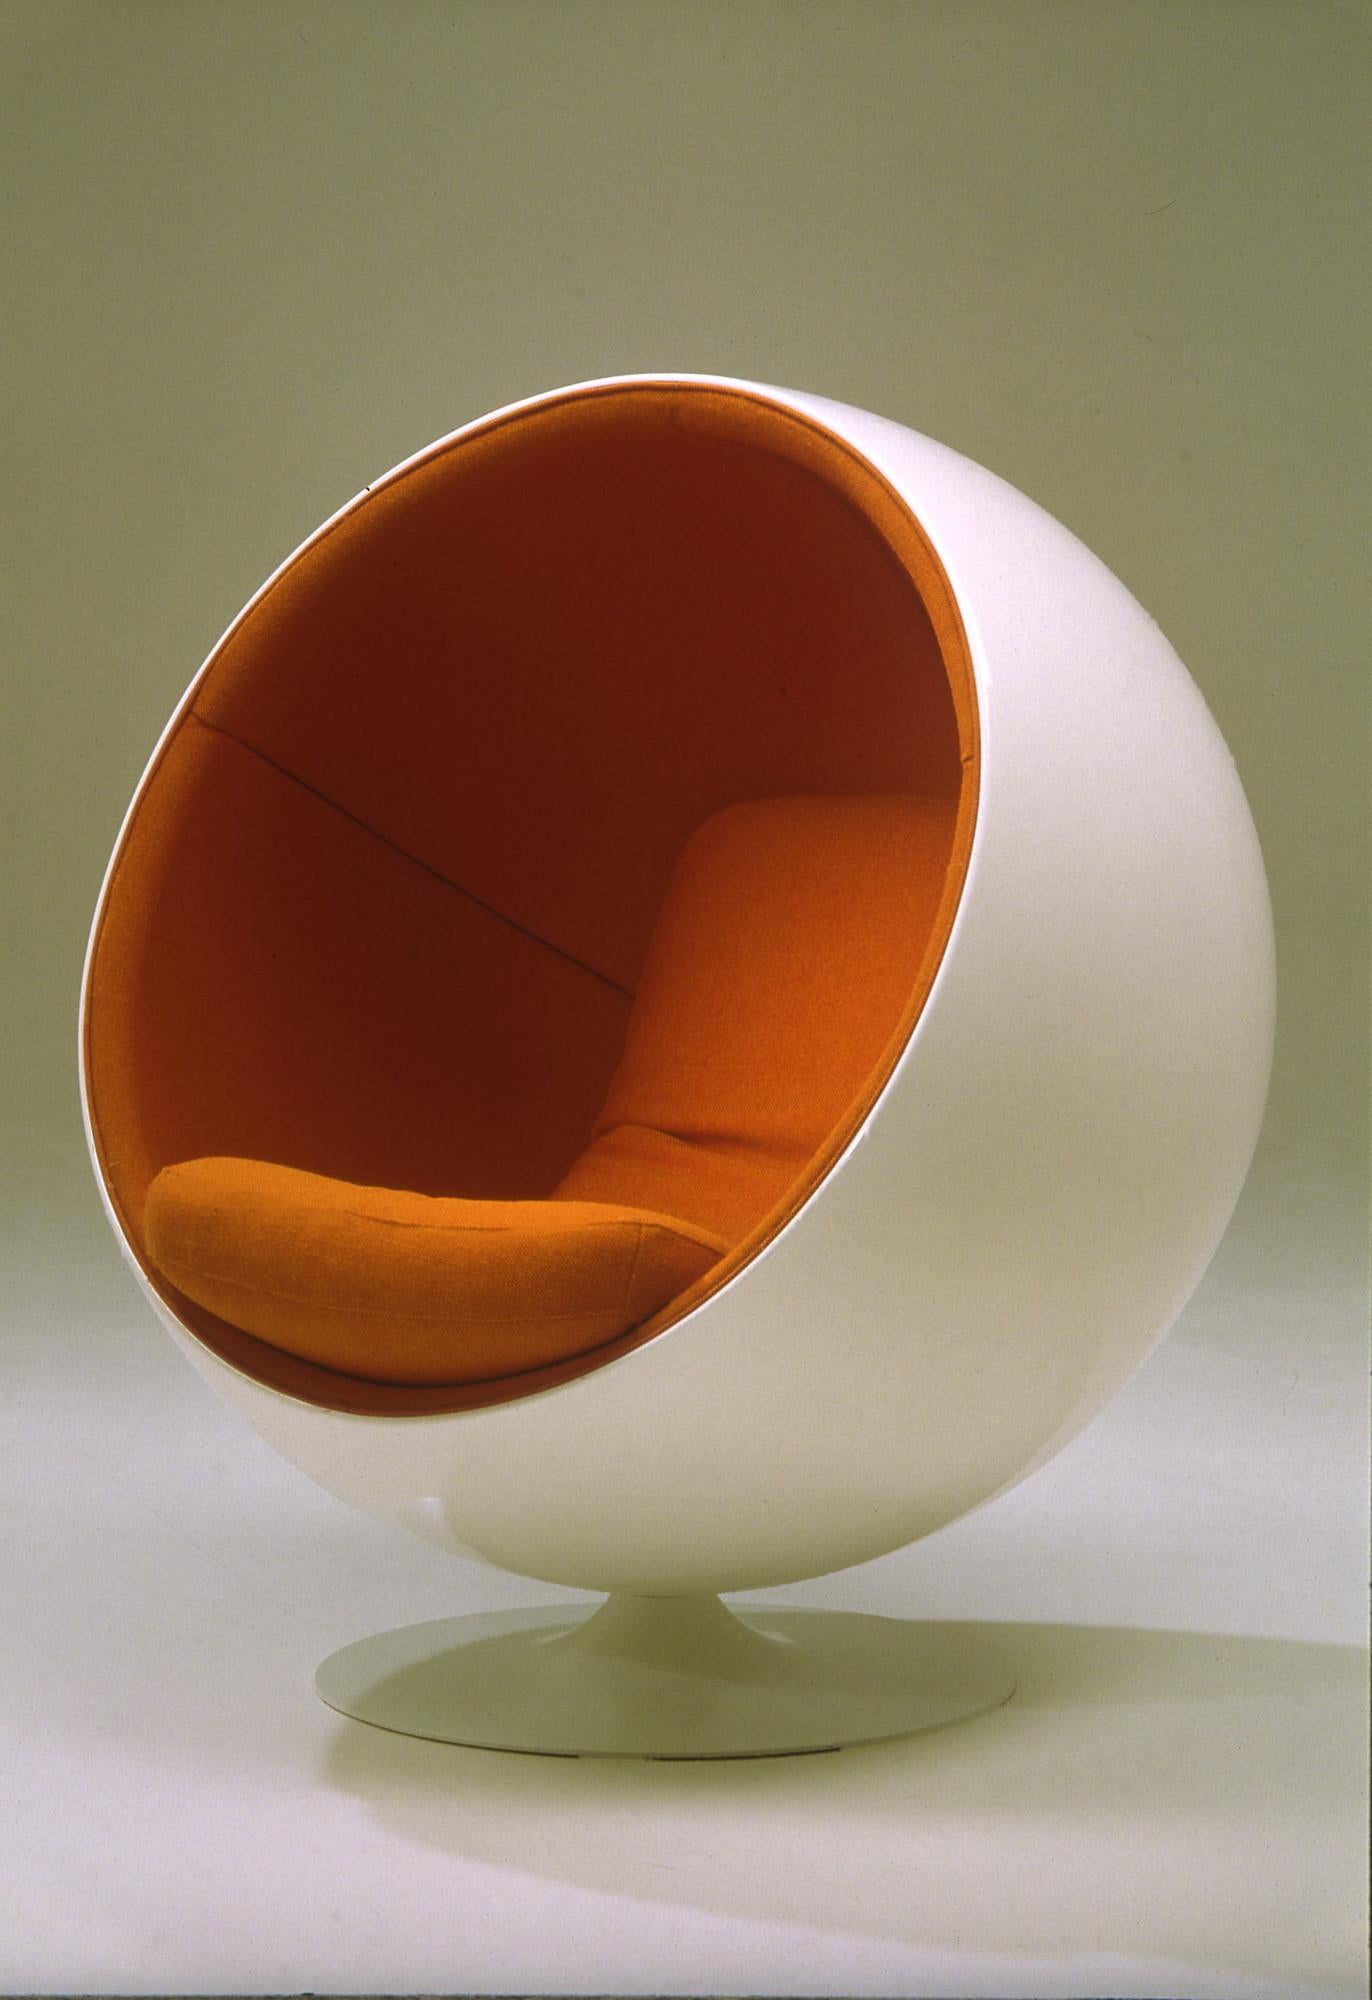 The Ball Chair was designed in 1963 and debuted at the Cologne Furniture Fair in 1966. The chair is one of the most famous and beloved classics of Finnish design and it was the international breakthrough of Eero Aarnio. The Ball Chair can be found